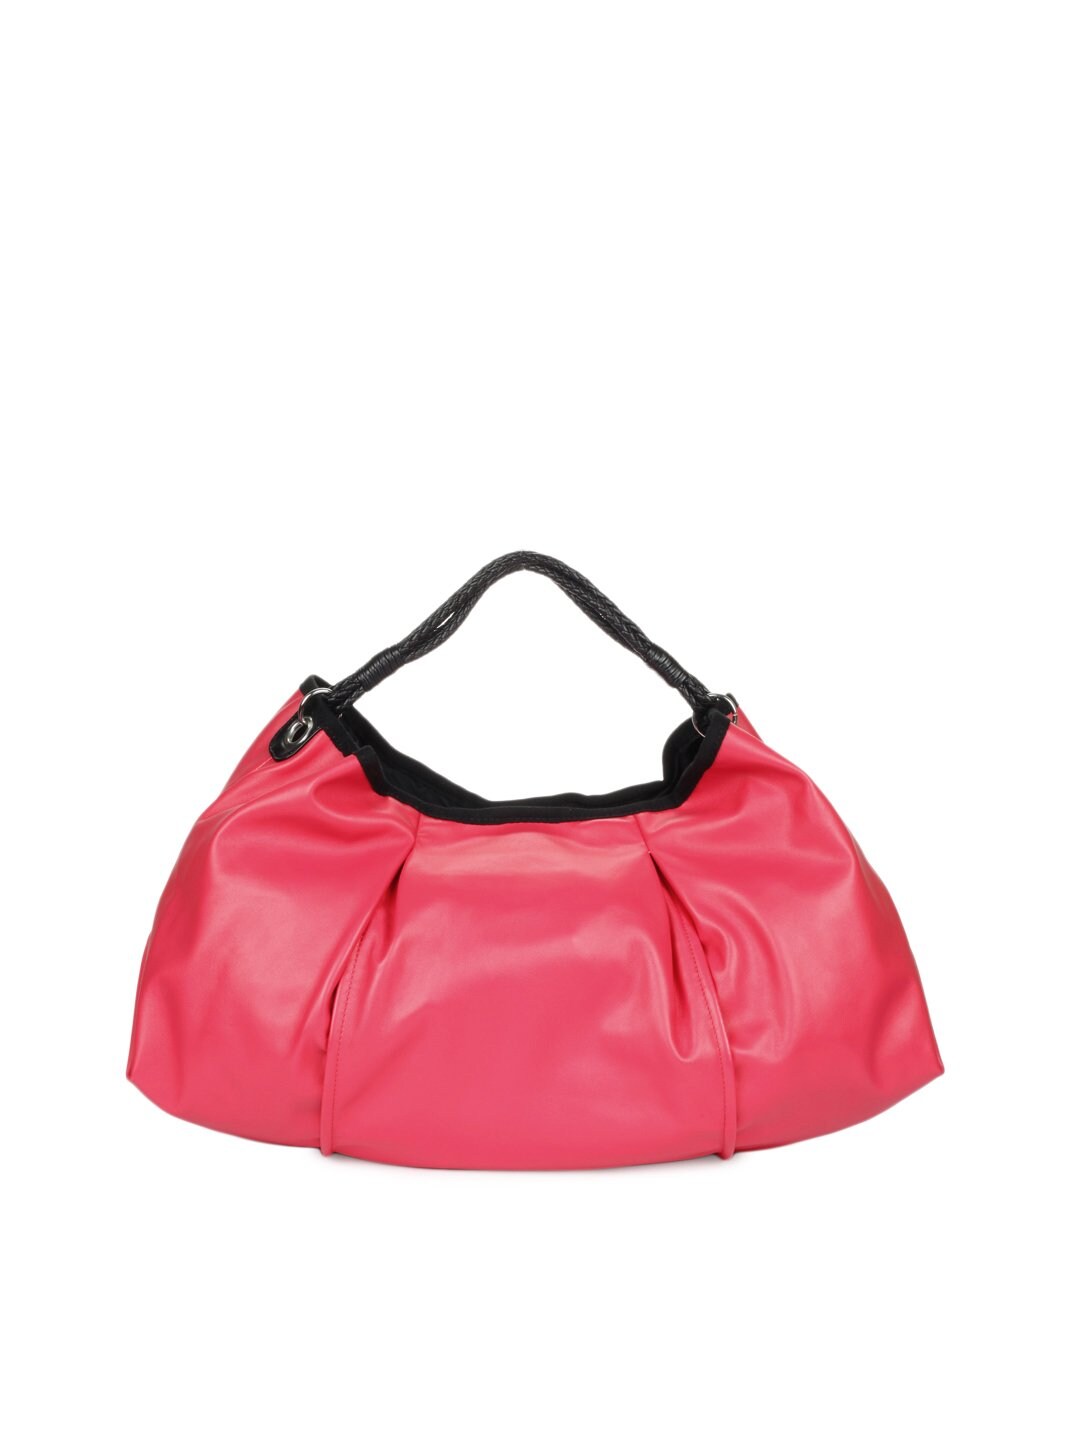 United Colors of Benetton Women Pink Bag